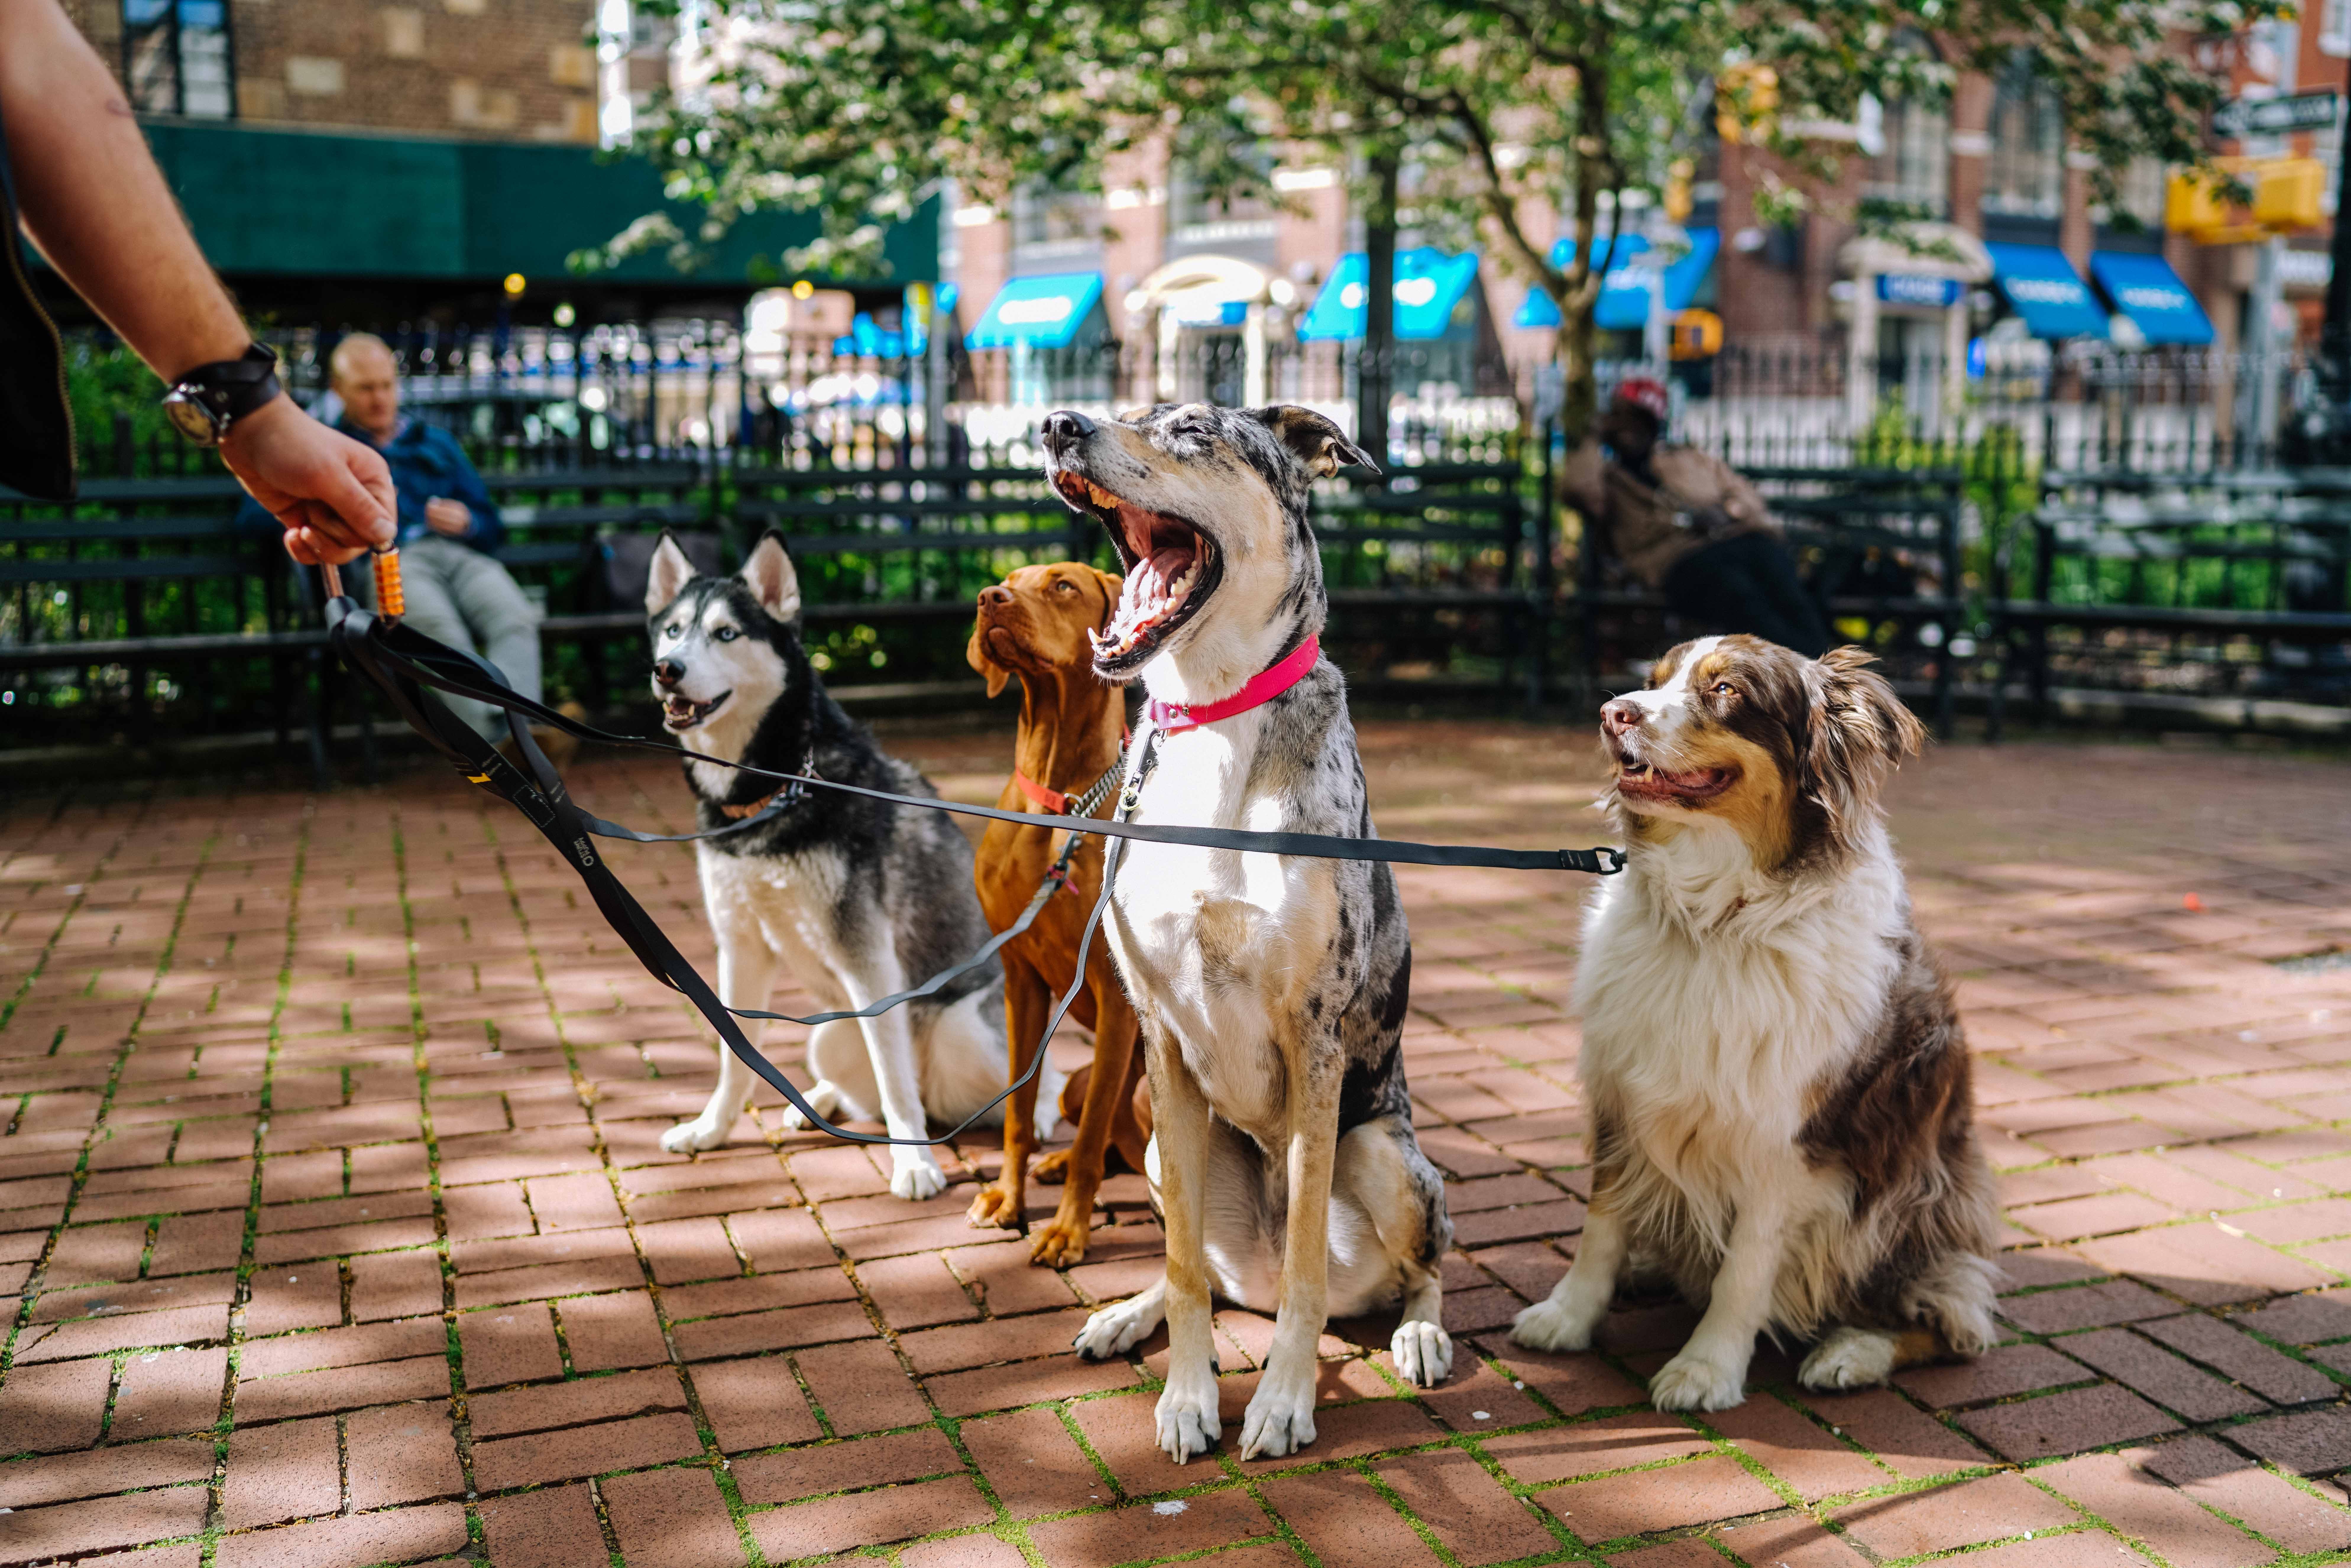 Four dogs on a leash in a park. One of the dogs has its mouth open, either yawning or barking.